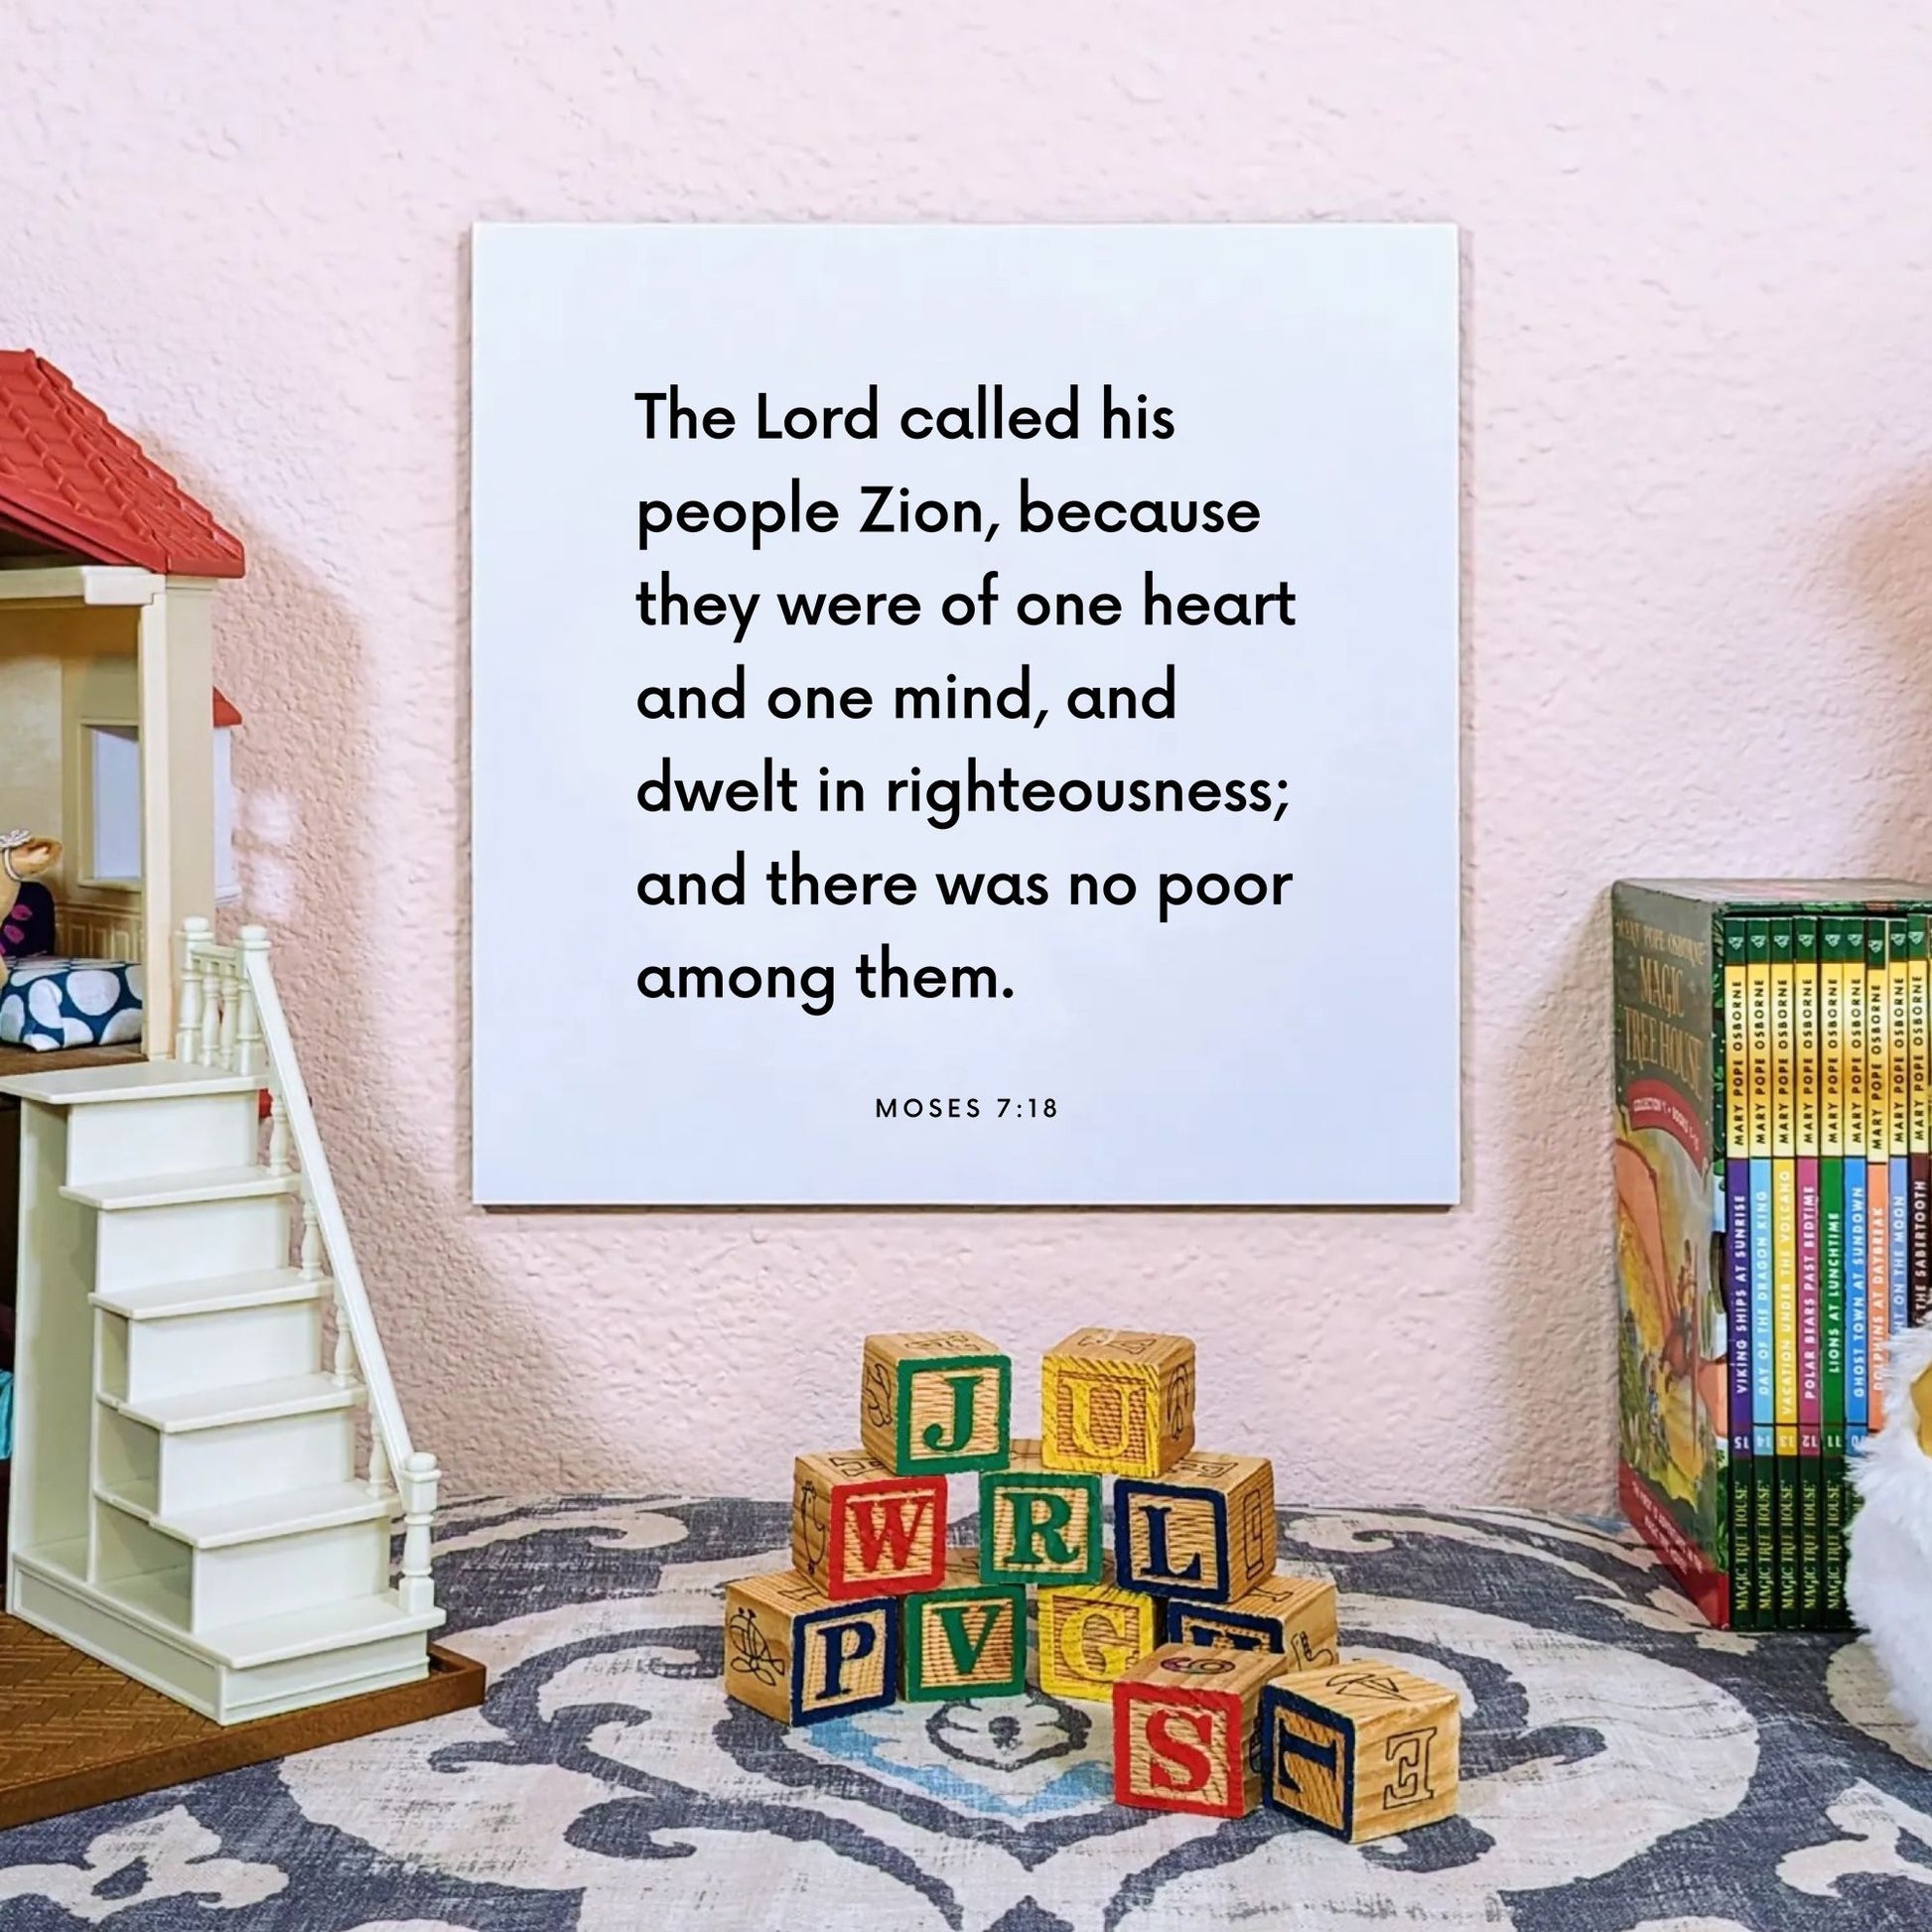 Playroom mouting of the scripture tile for Moses 7:18 - "Because they were of one heart and one mind"